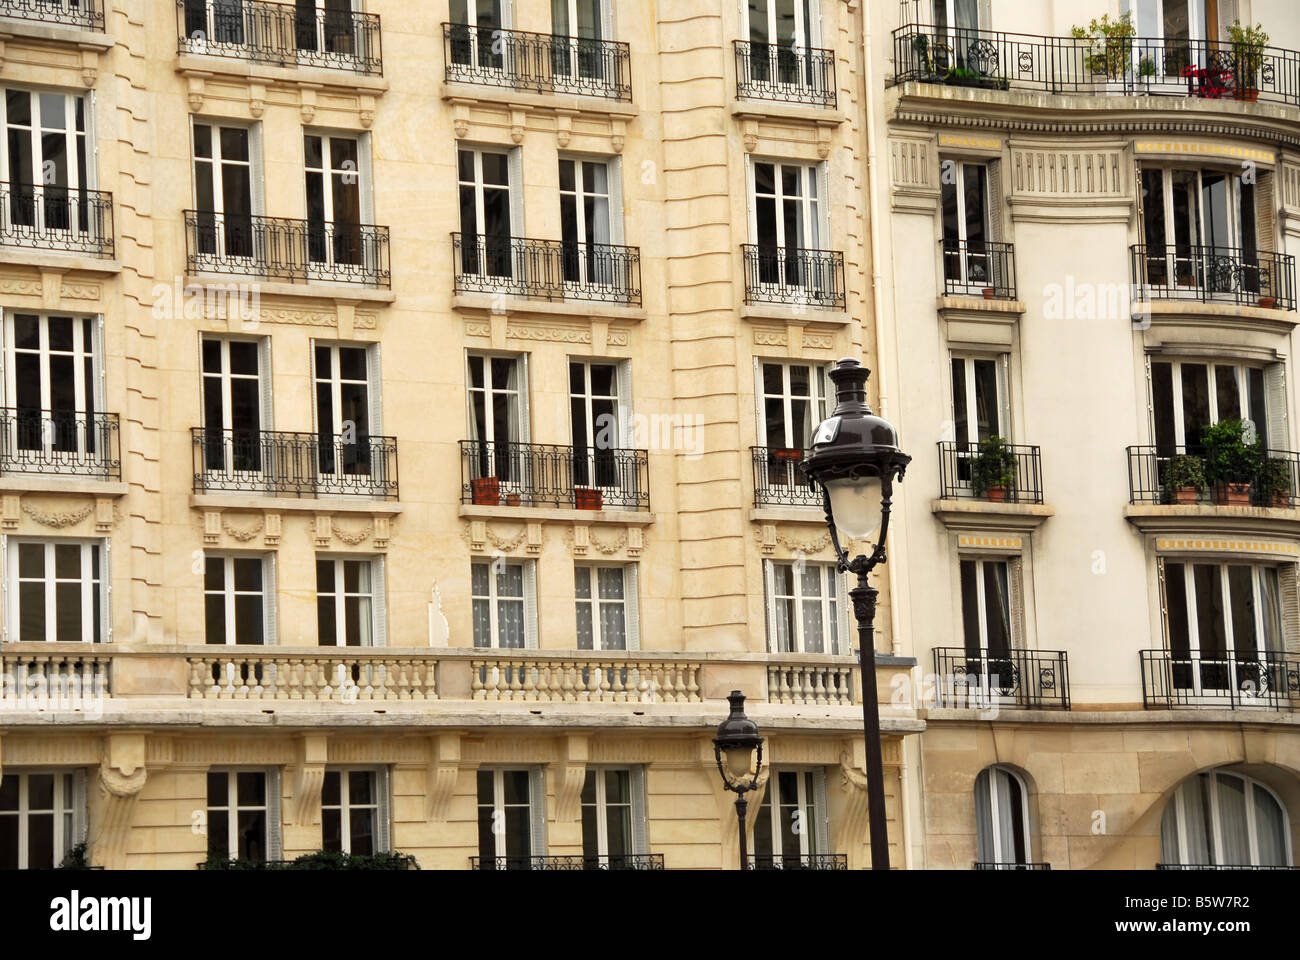 Windows and balconies of old apartment buildings in Paris France Stock Photo